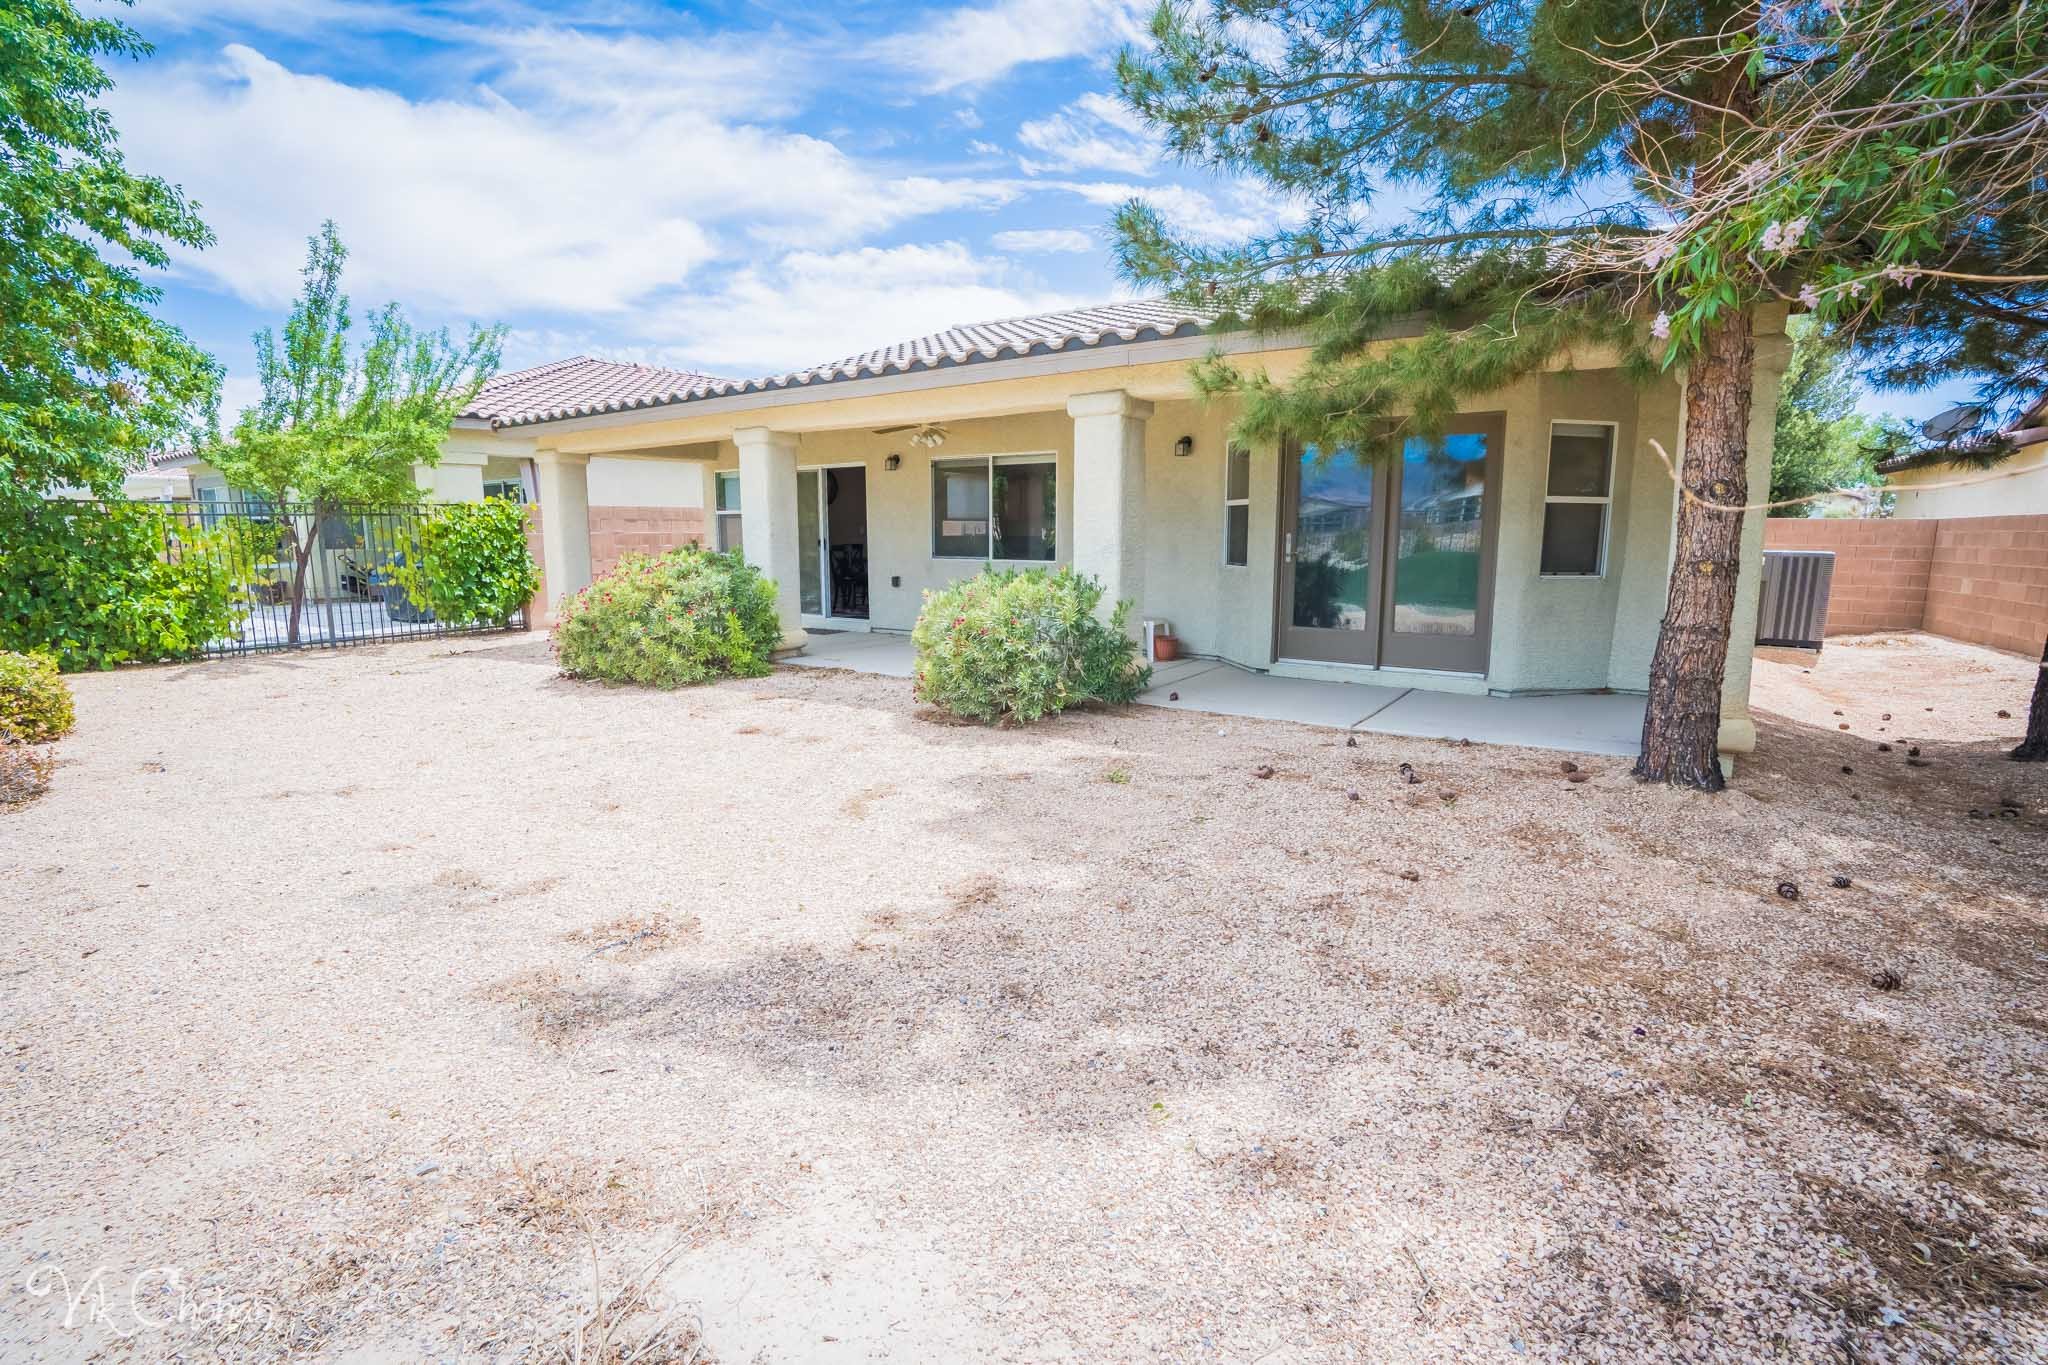 2022-05-15-5378-E-Cansano-St-Pahrump-Real-Estate-Photography-Virtual-Tour-Drone-Photography-Vik-Chohan-Photography-Photo-Booth-Social-Media-VCP-086.jpg